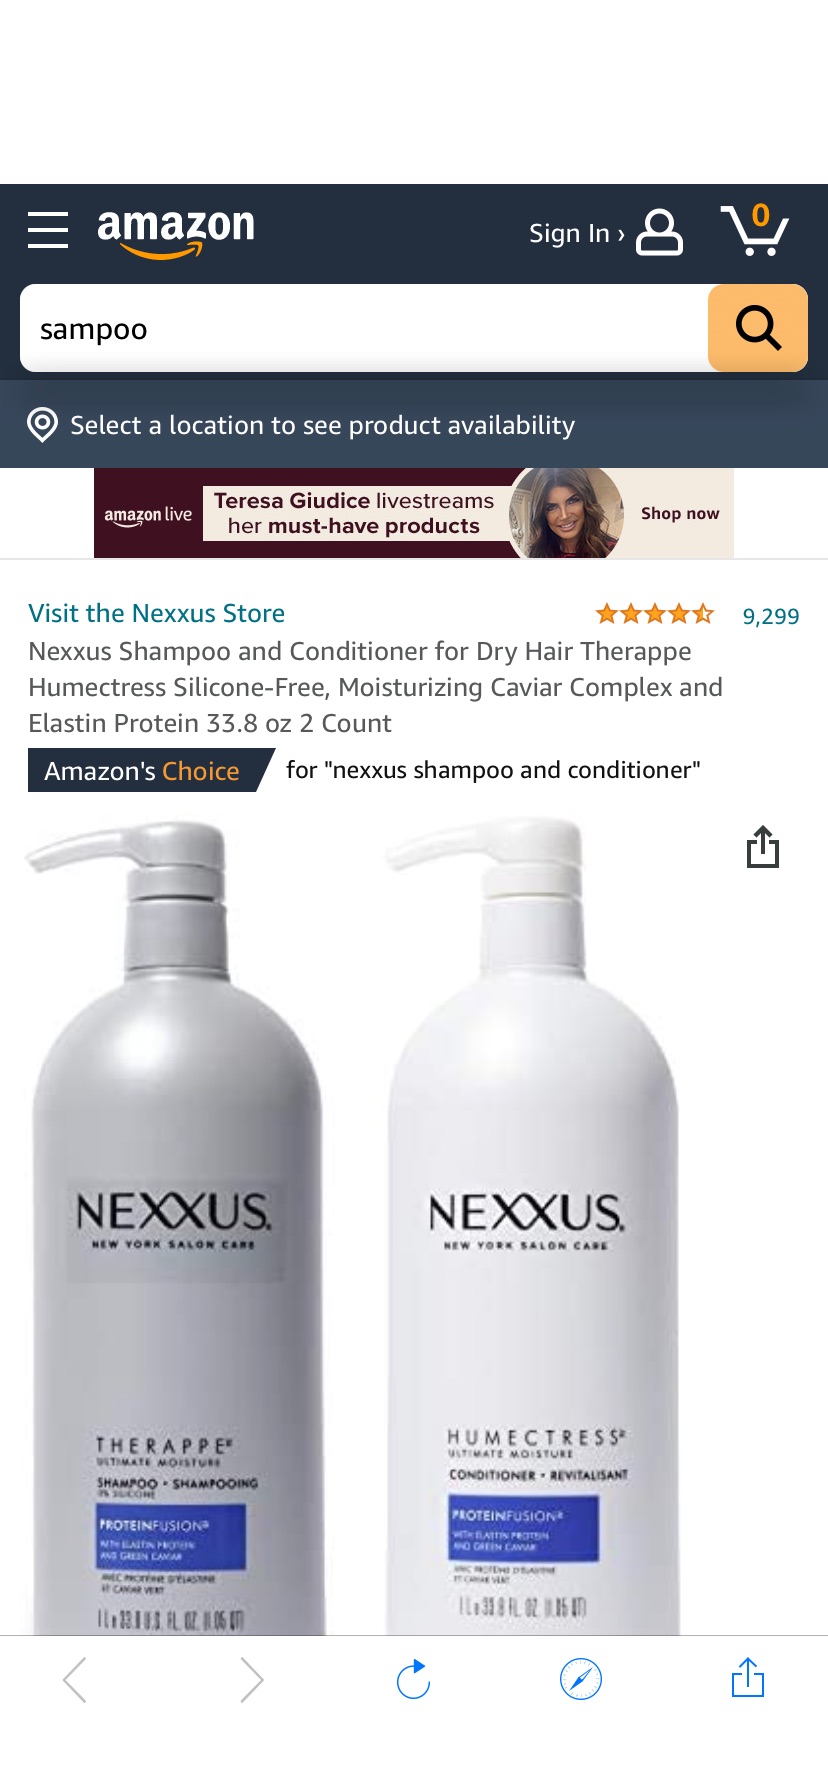 Amazon.com: Nexxus Shampoo and Conditioner for Dry Hair Therappe Humectress Silicone-Free, Moisturizing Caviar Complex and Elastin Protein 33.8 oz 2 Count洗发